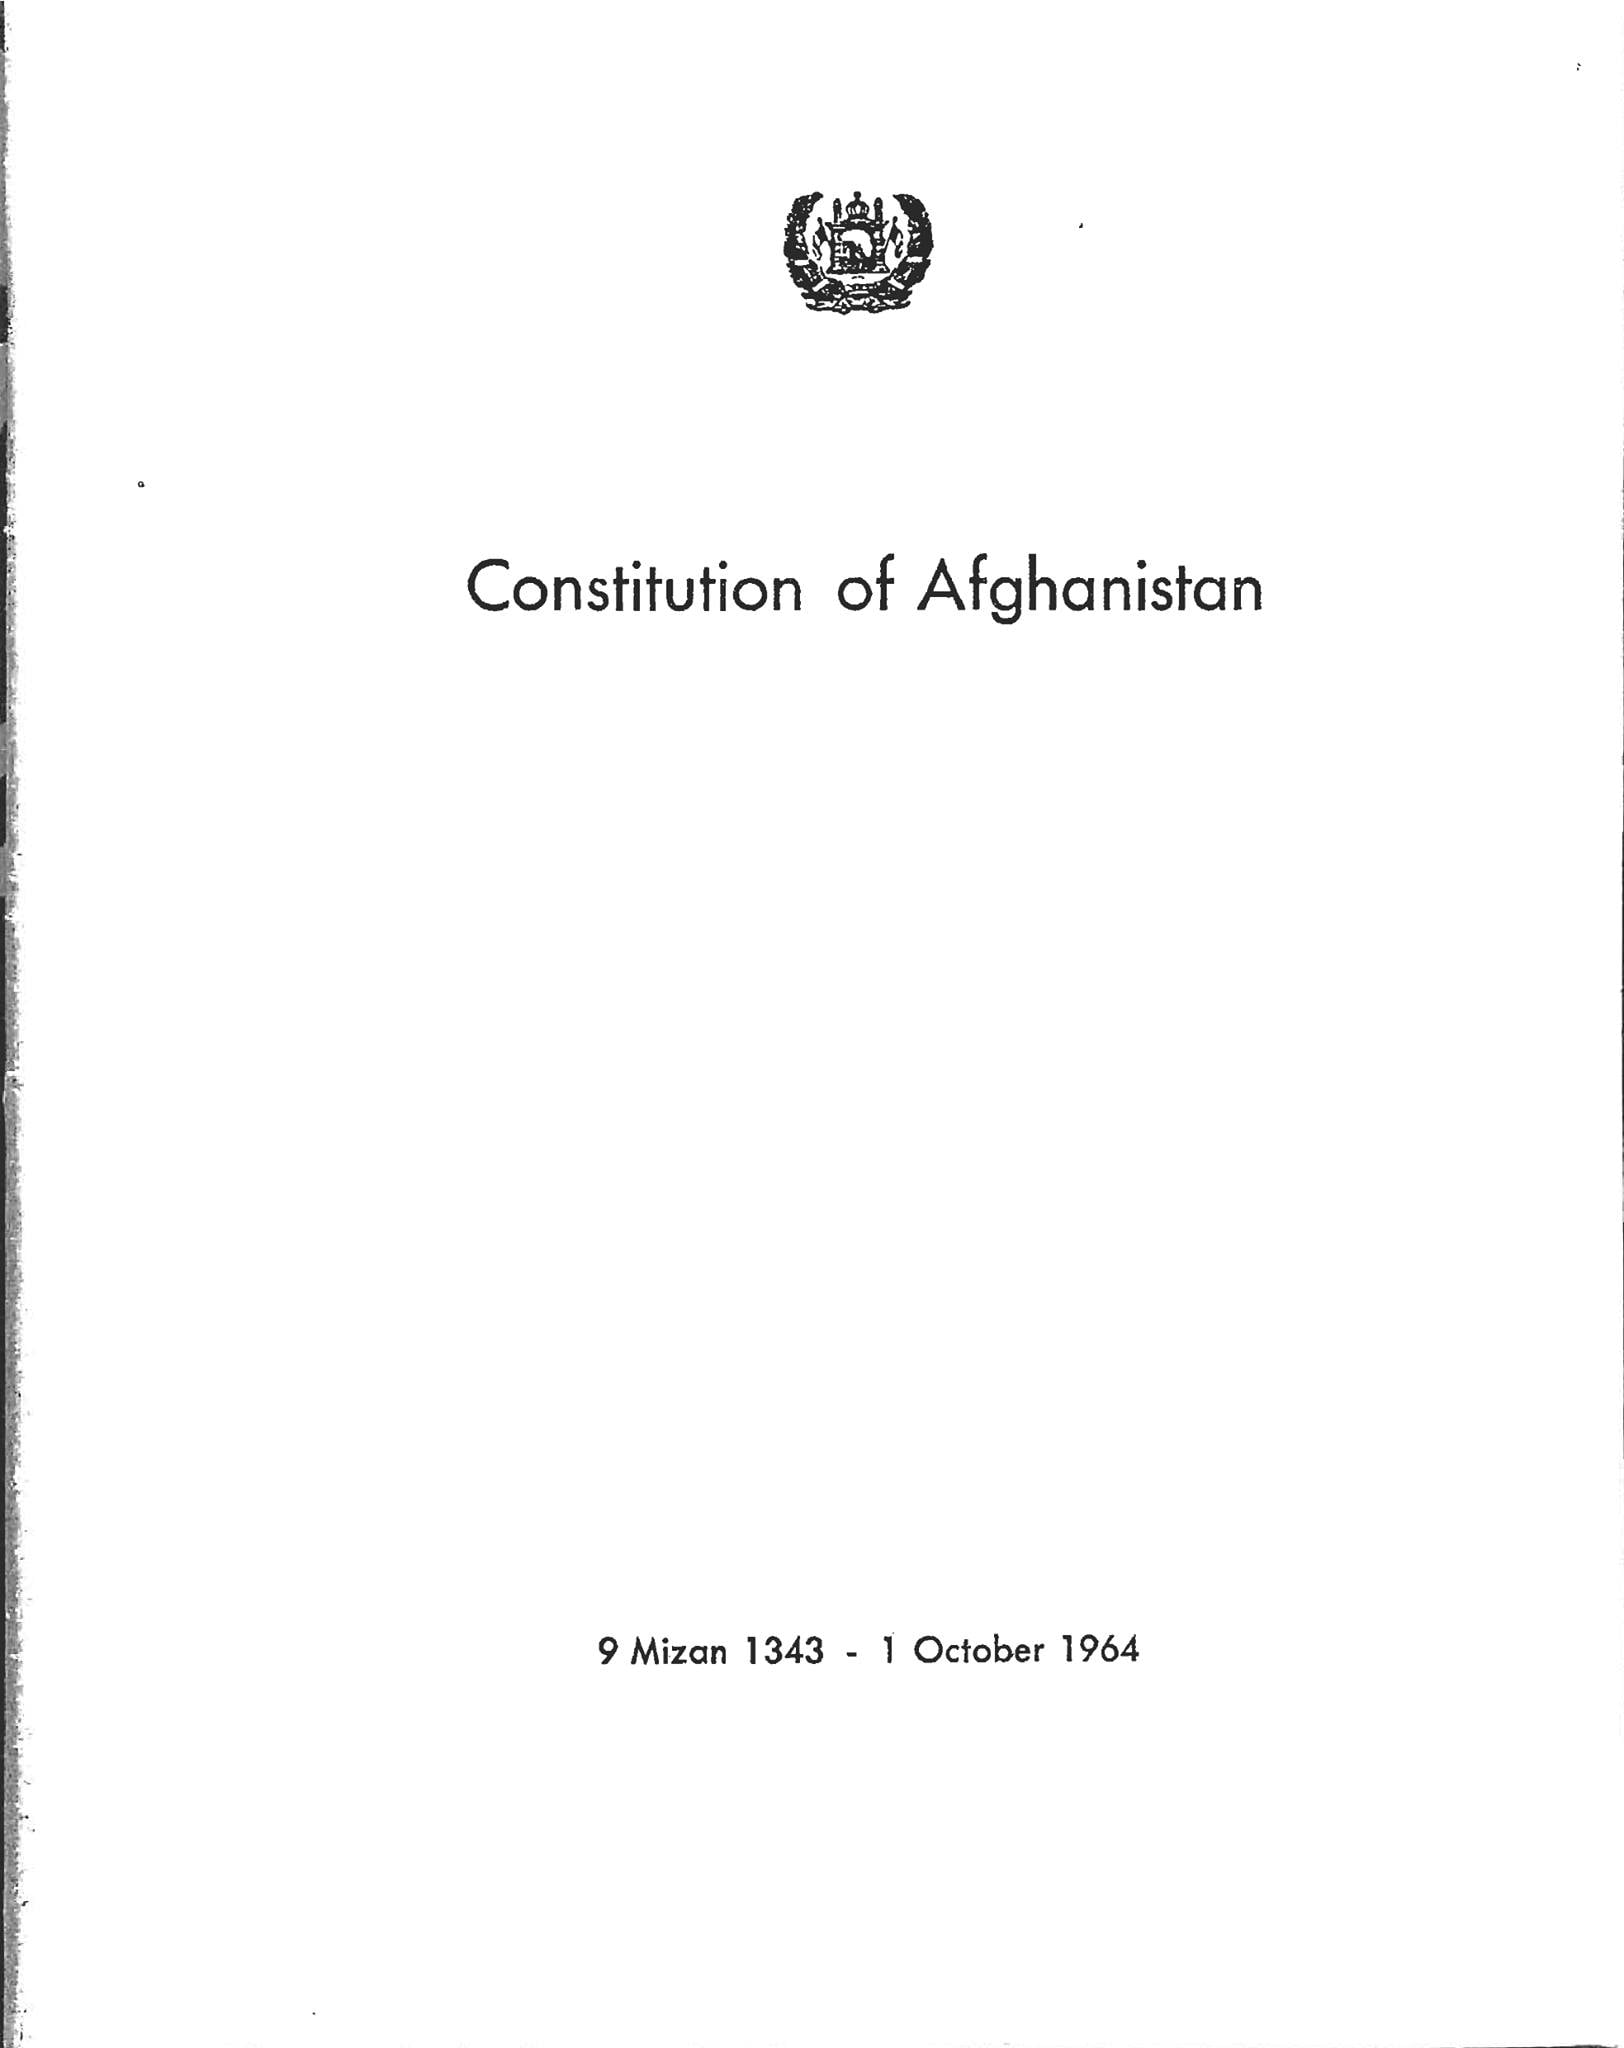 Constitution of Afghanistan - 1 October 1964